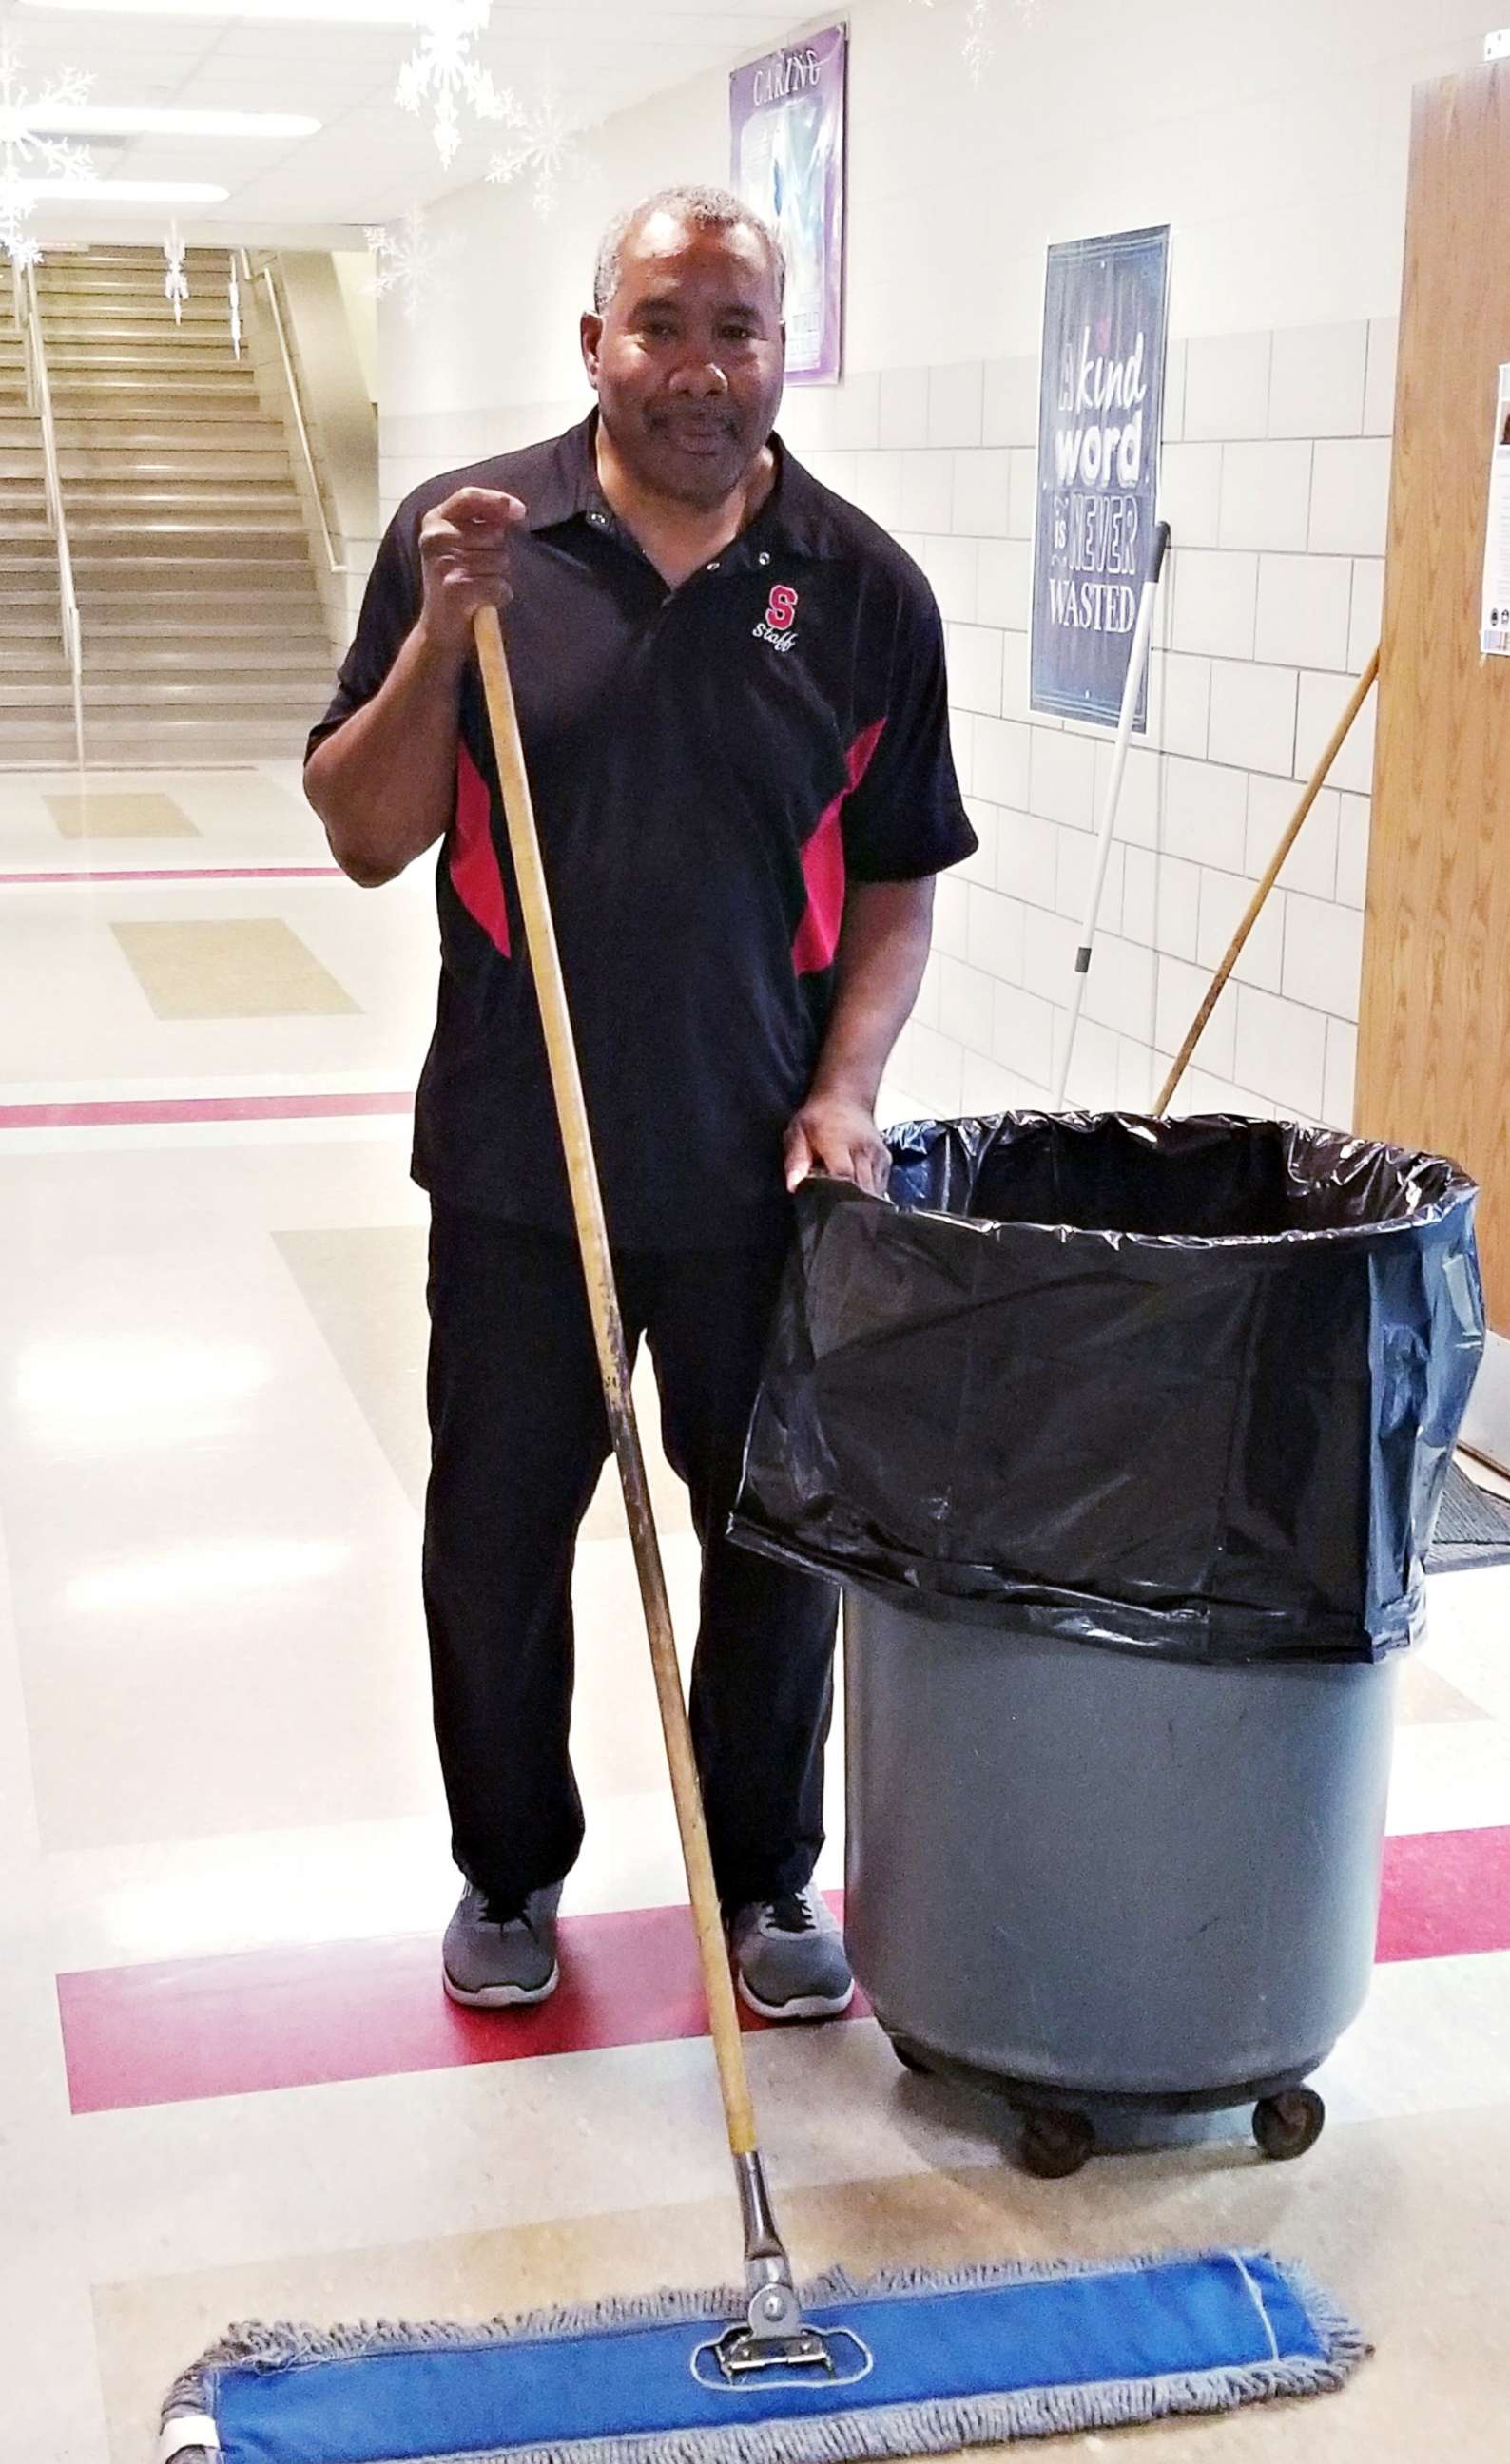 PHOTO: Wilbert Knight, a custodian at Pugliese West Elementary School in Steubenville, Ohio, brings joy to the staff and students with his lovely singing voice.